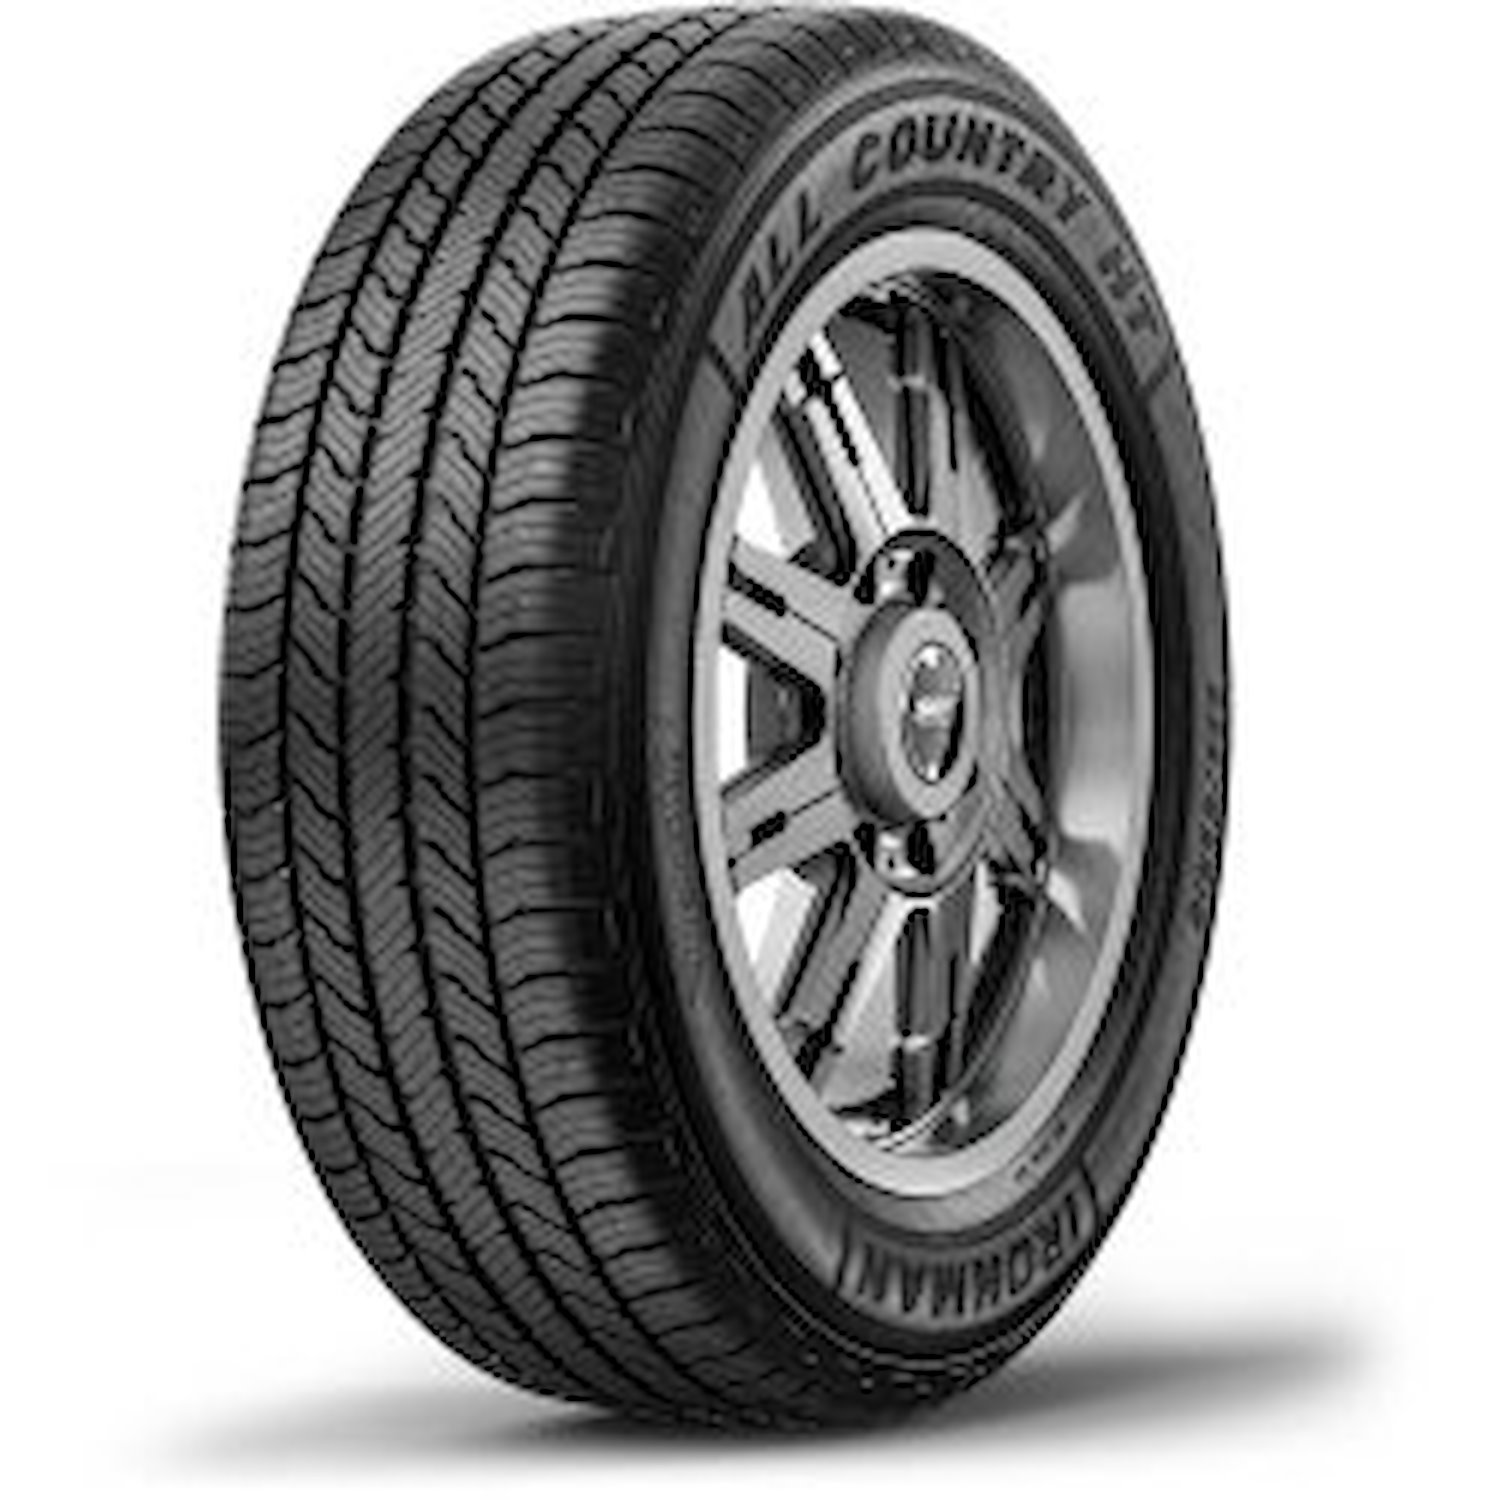 03055 All Country HT Tire, 245/60R18, 105H